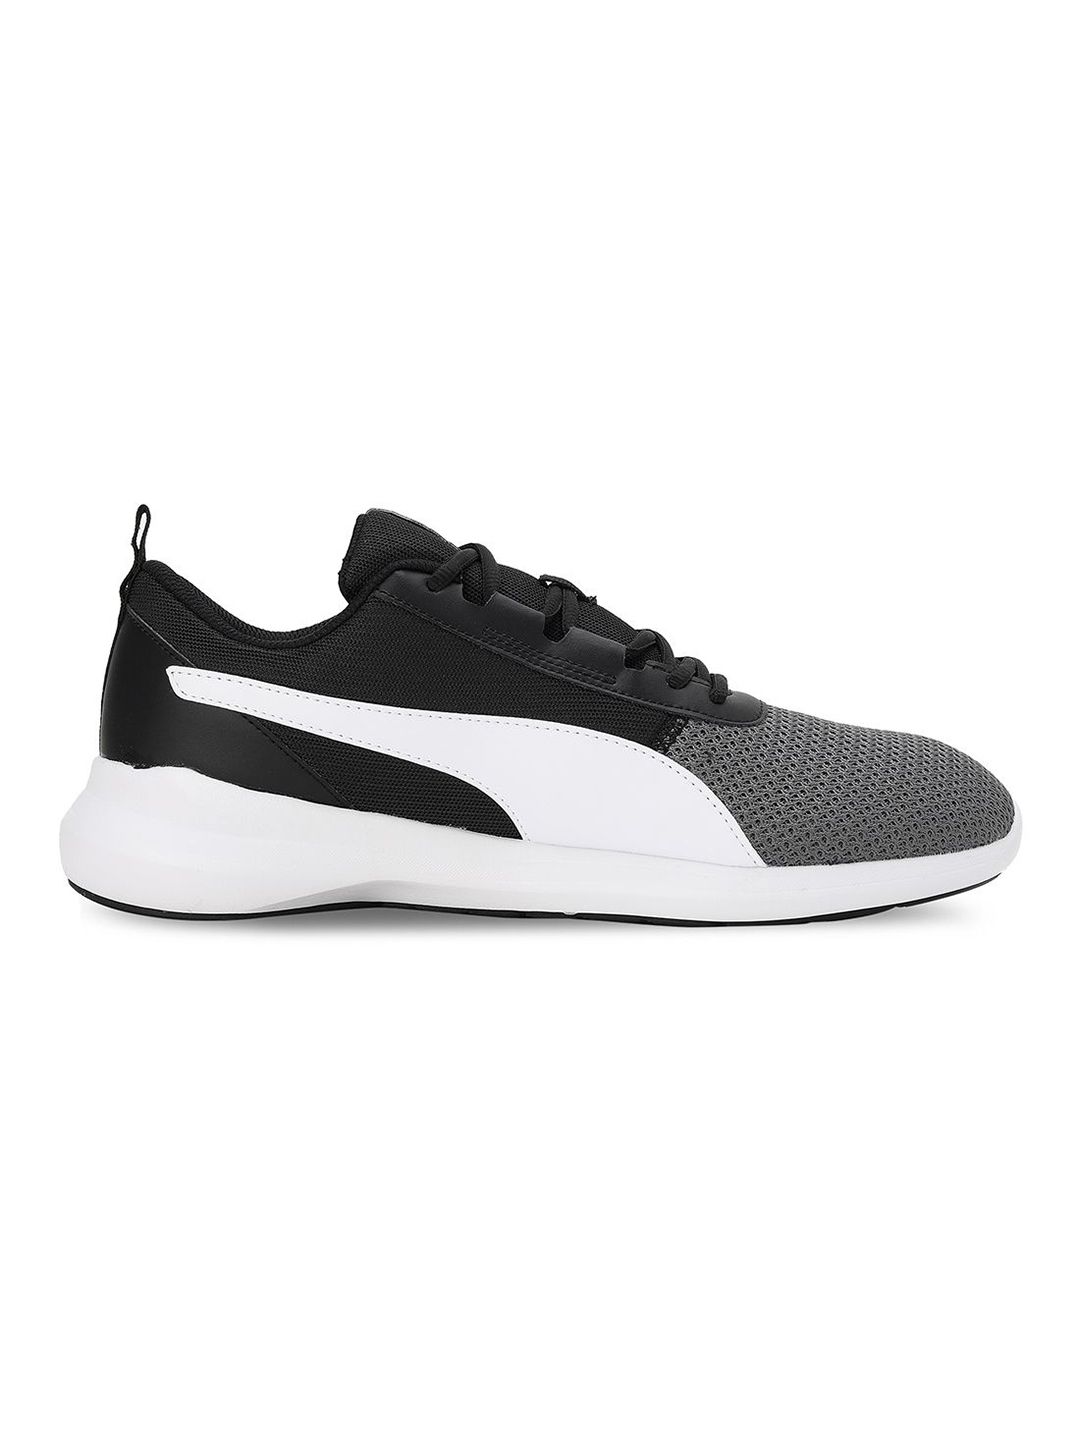 Buy Men Grey & Black Pacer Prime Sports Shoes From Fancode Shop.